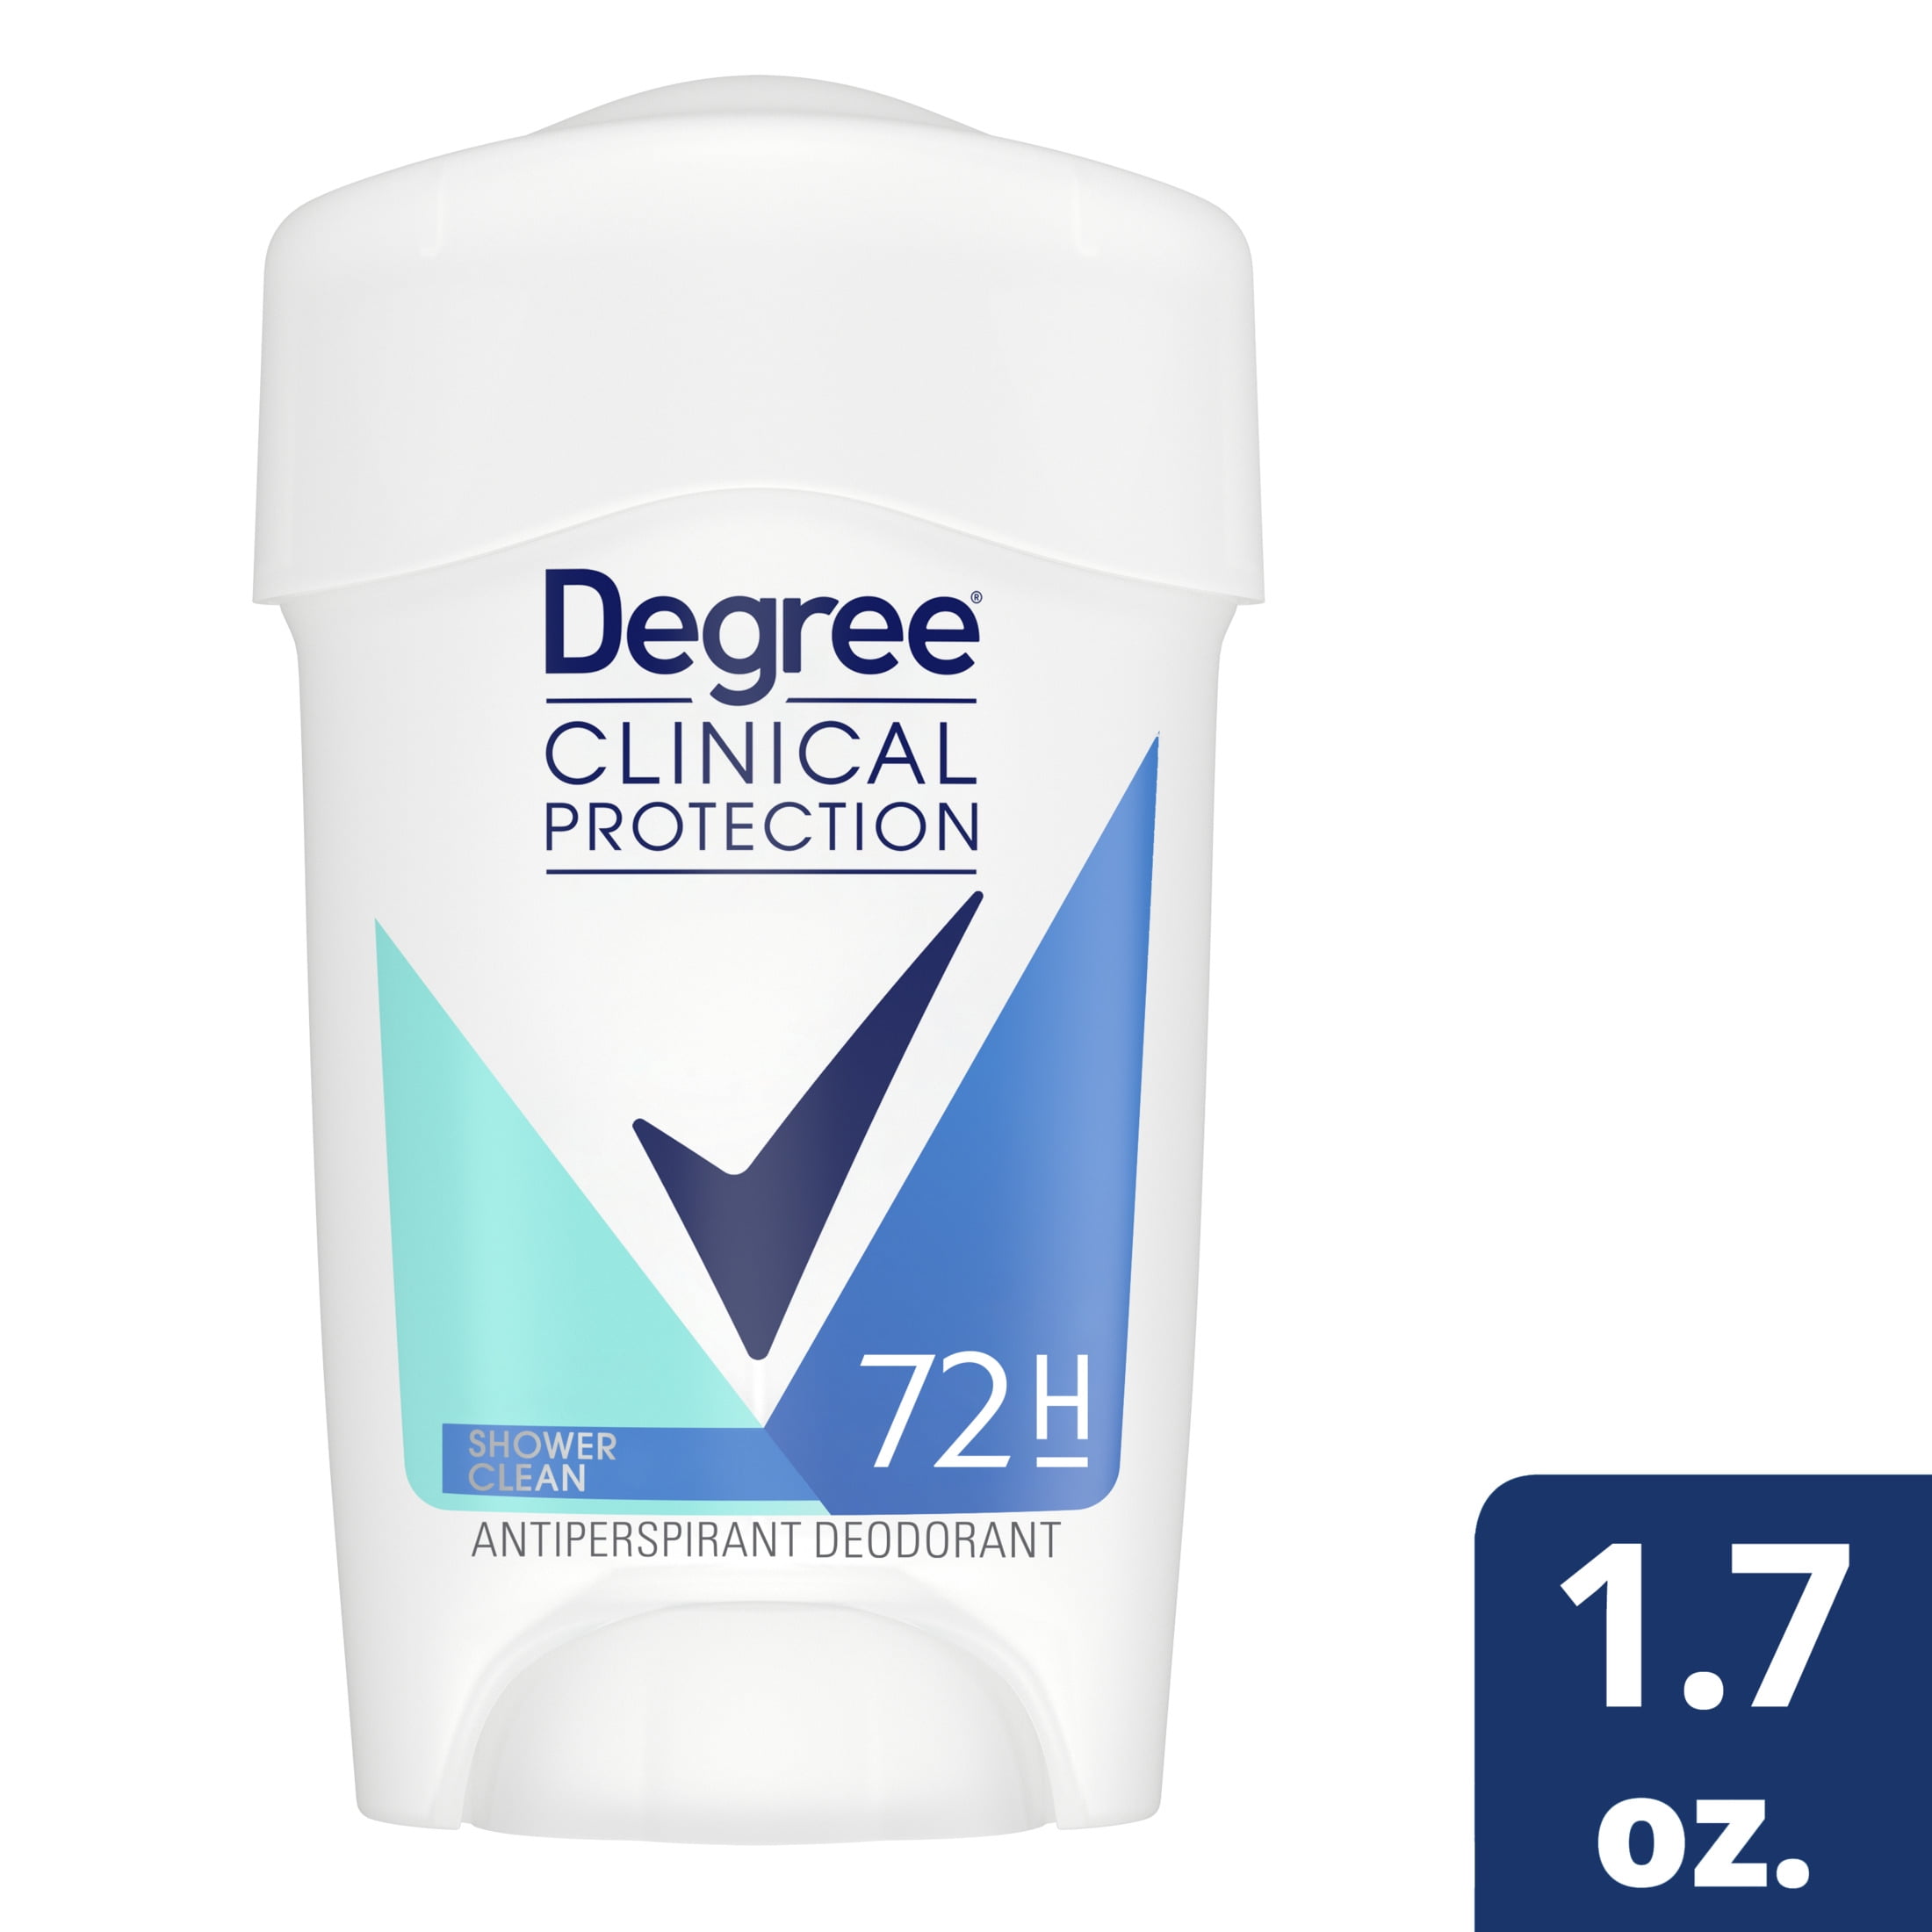 Degree Clinical Protection Shower Clean Antiperspirant Deodorant, 1.7 oz